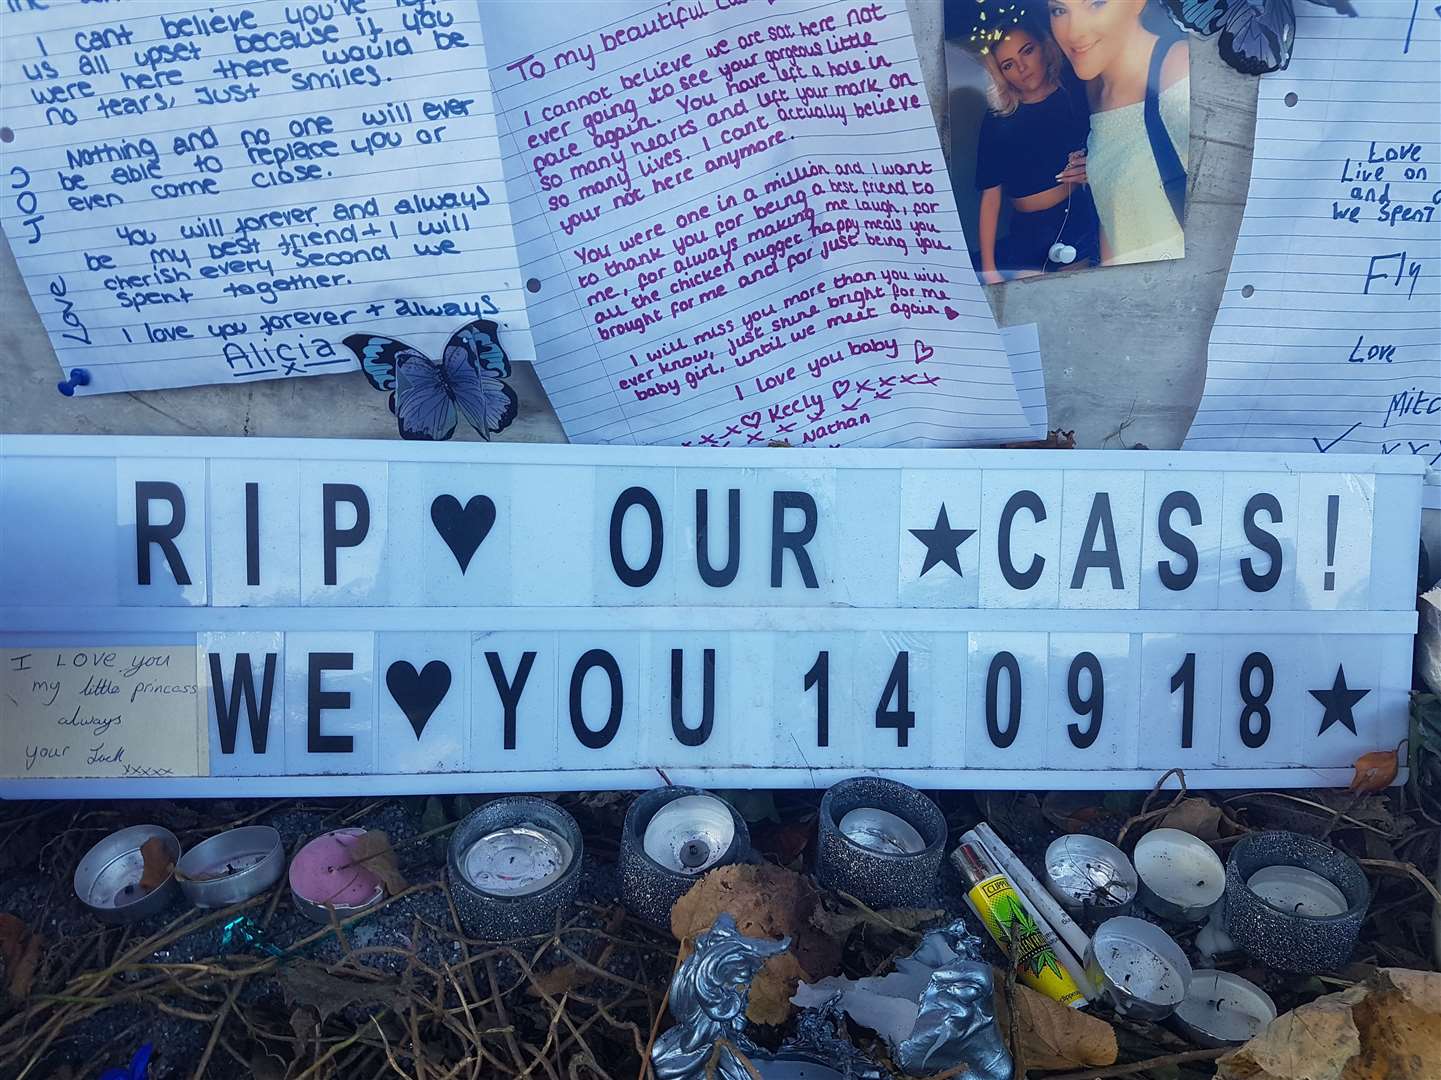 Tributes to Casey were left at the roadside